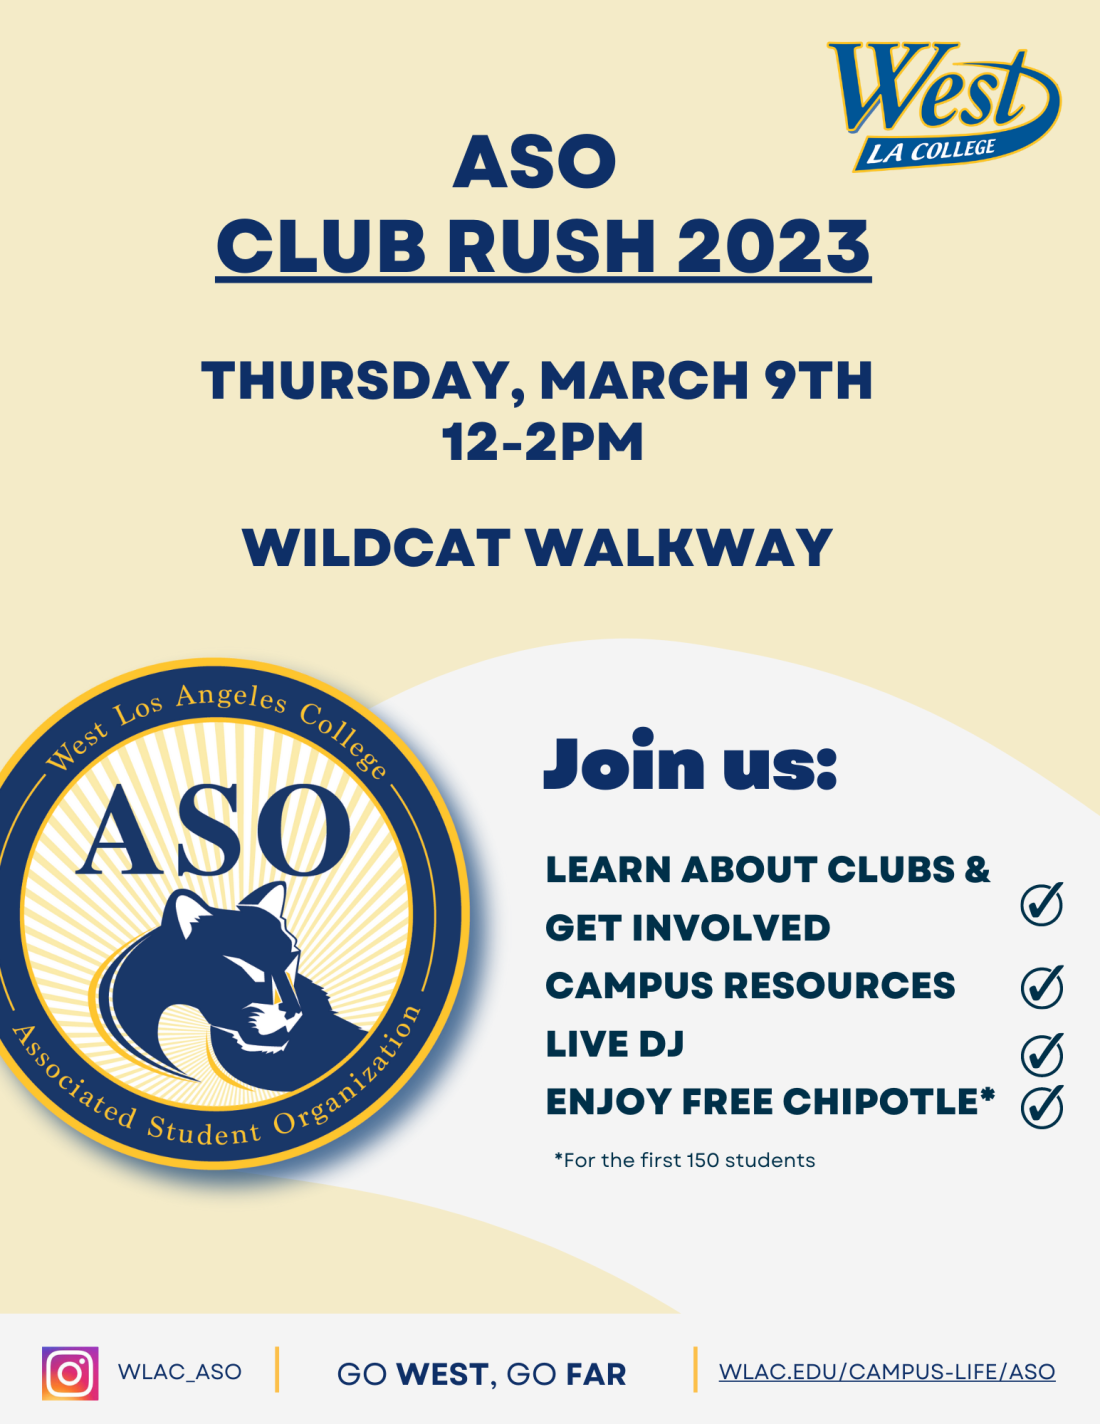 WLAC Club Rush 03/09/23 from 12 -2 pm at the Wildcat Walk way. Learn about clubs, resources, live dj, and free chipotle. Limited quantity of food